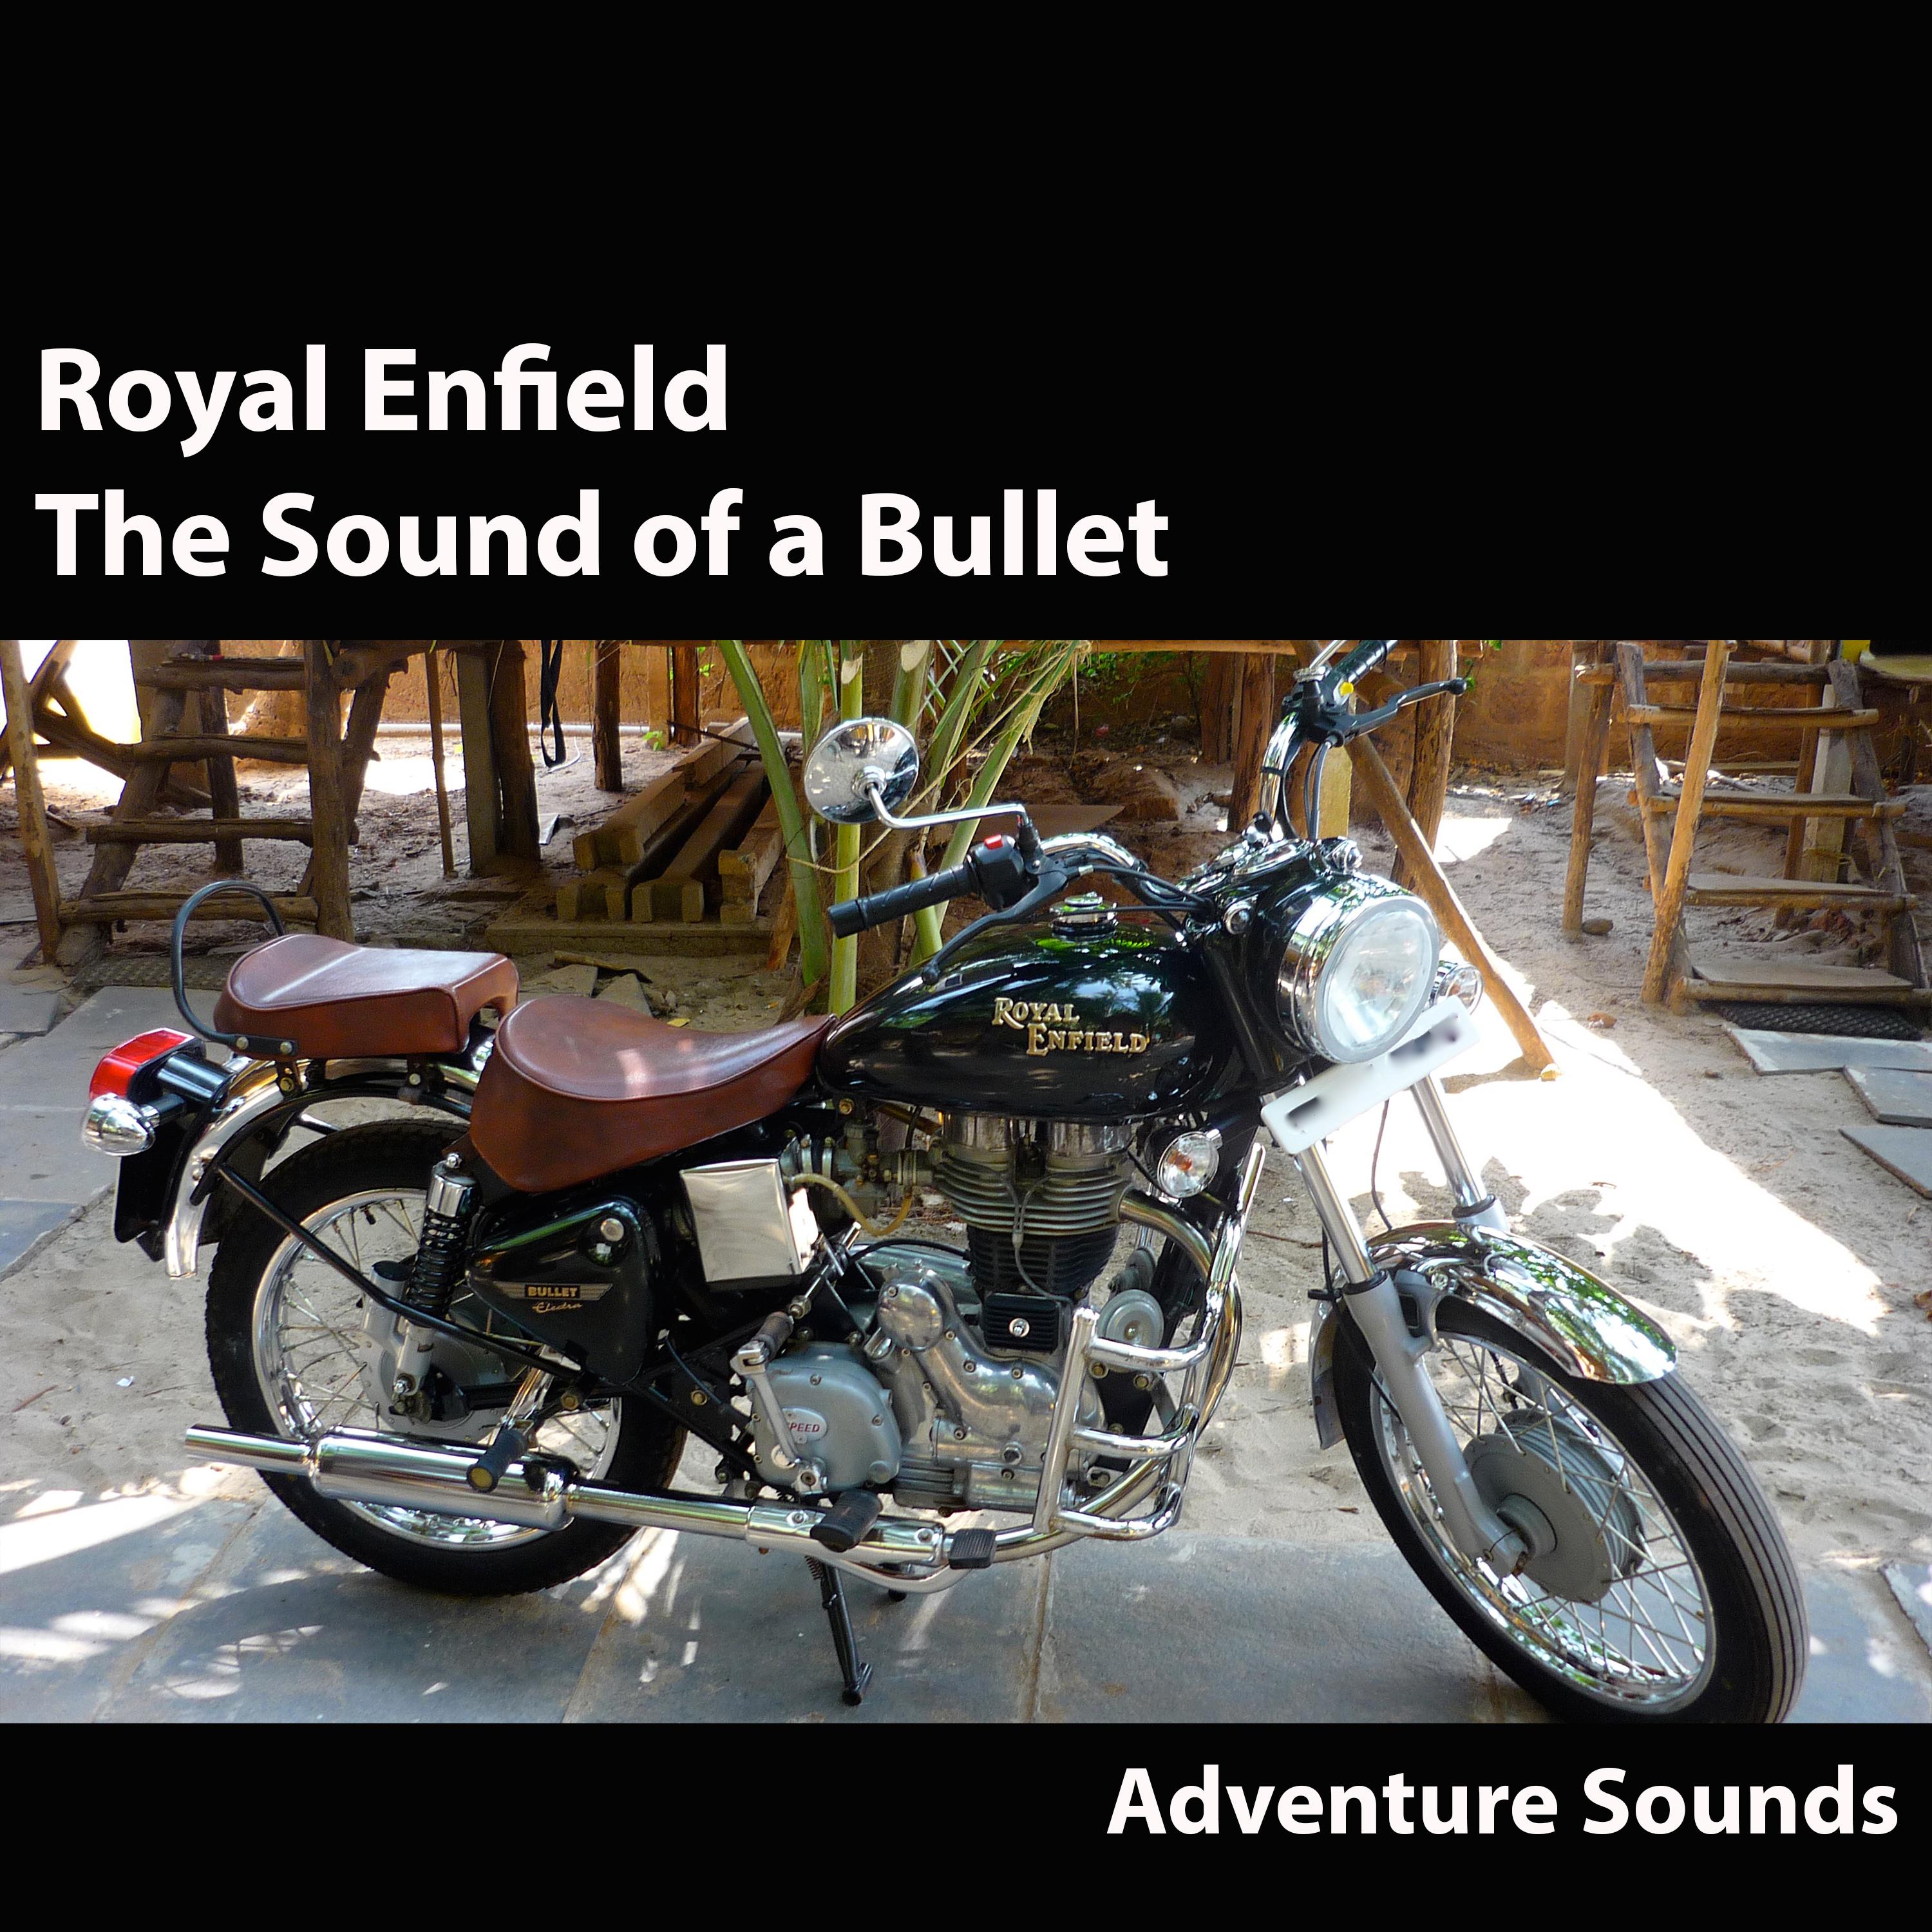 Royal Enfield The Sound of a Bullet